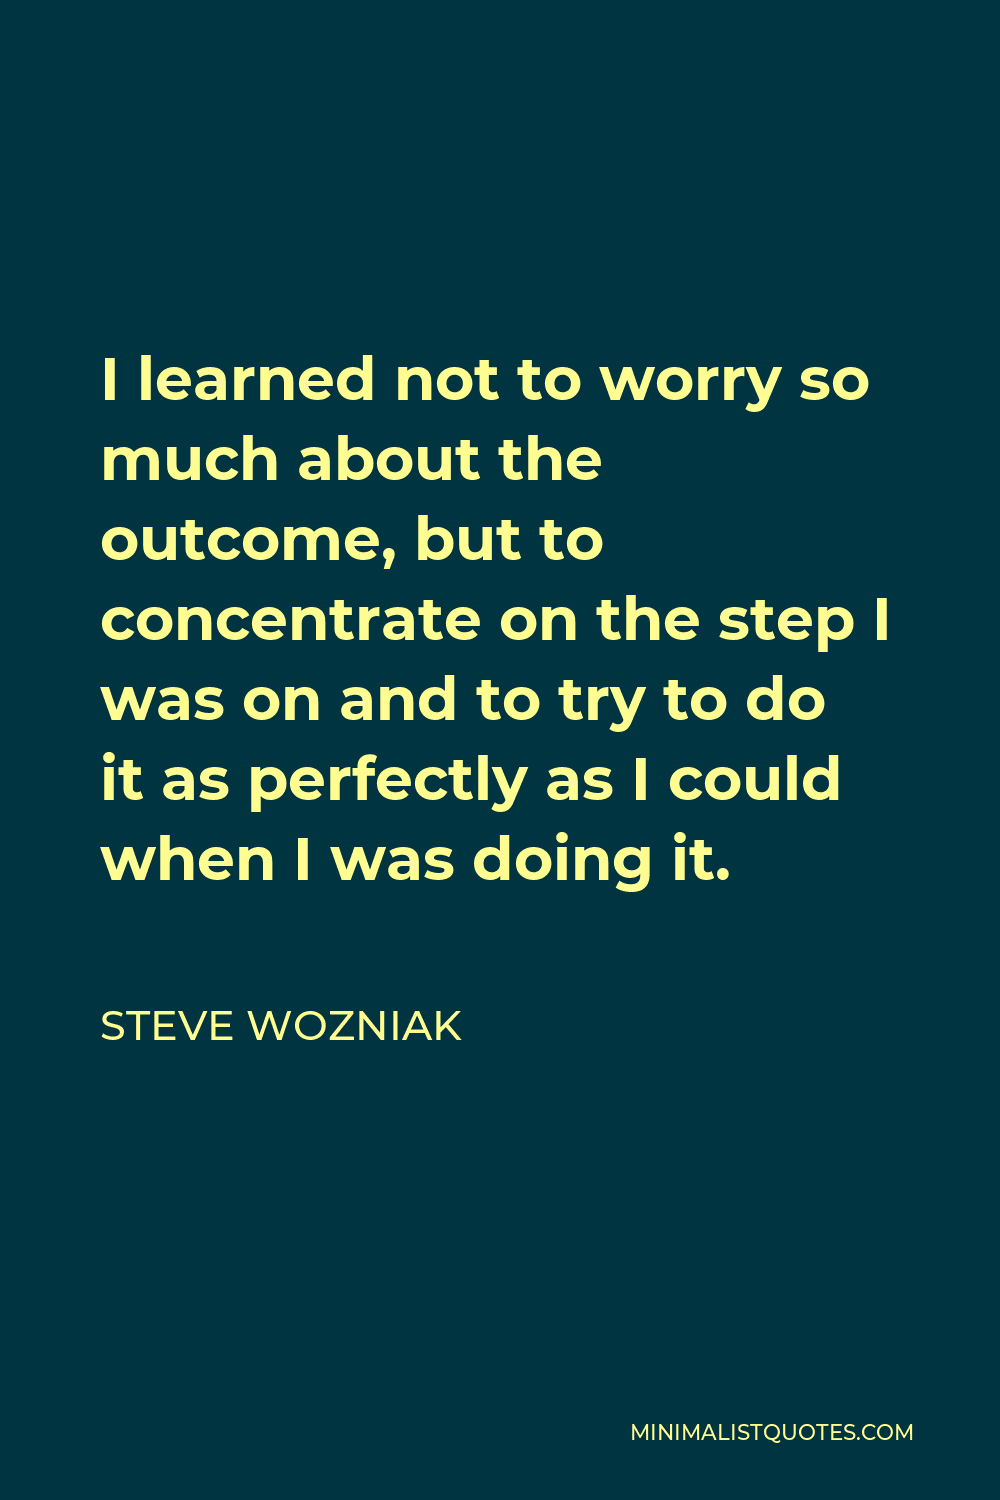 Steve Wozniak Quote - I learned not to worry so much about the outcome, but to concentrate on the step I was on and to try to do it as perfectly as I could when I was doing it.